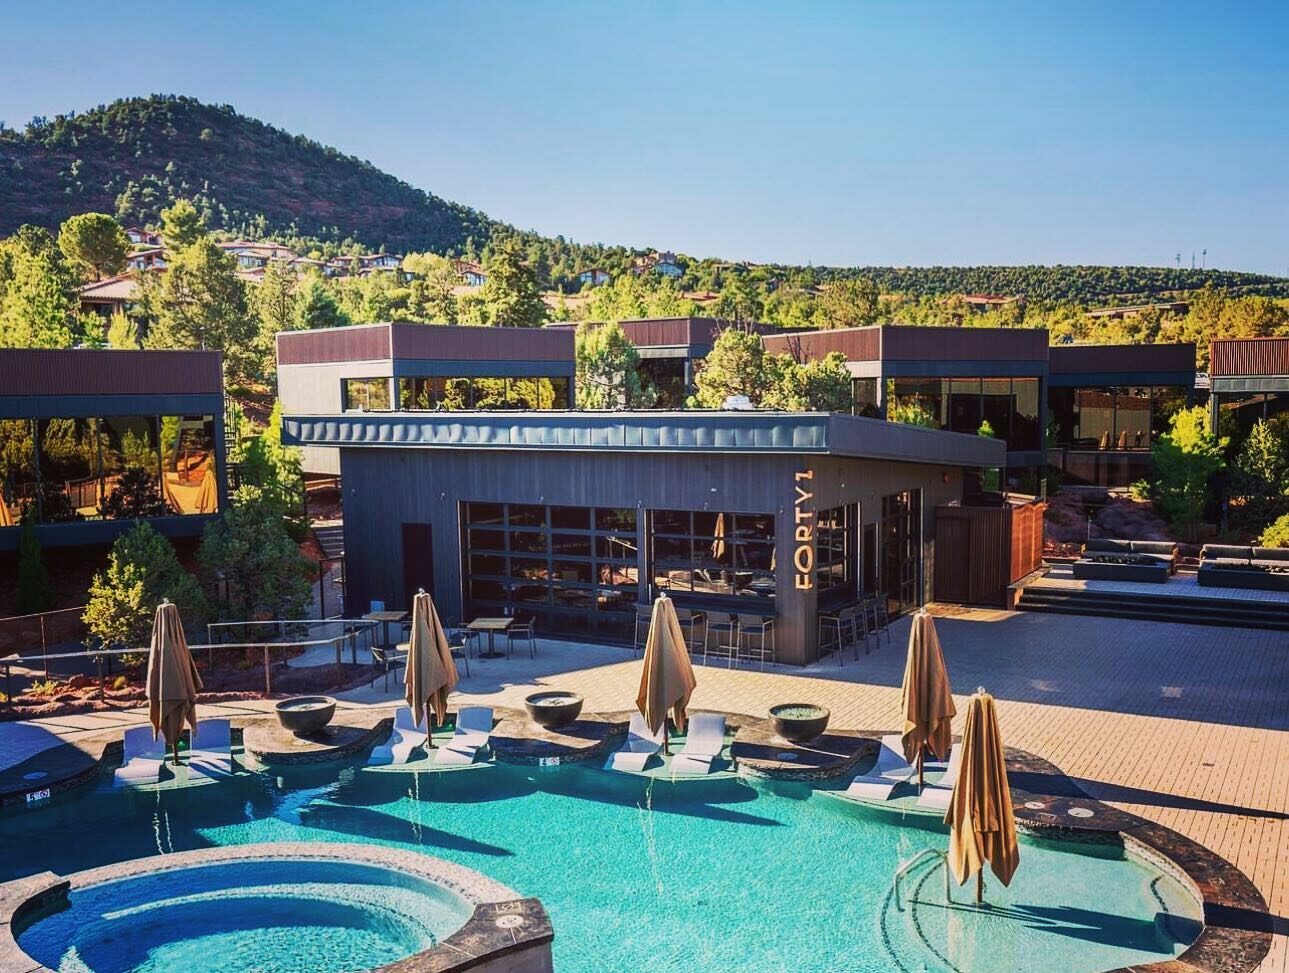 Ambiente Is An Adults-Only Resort In Arizona